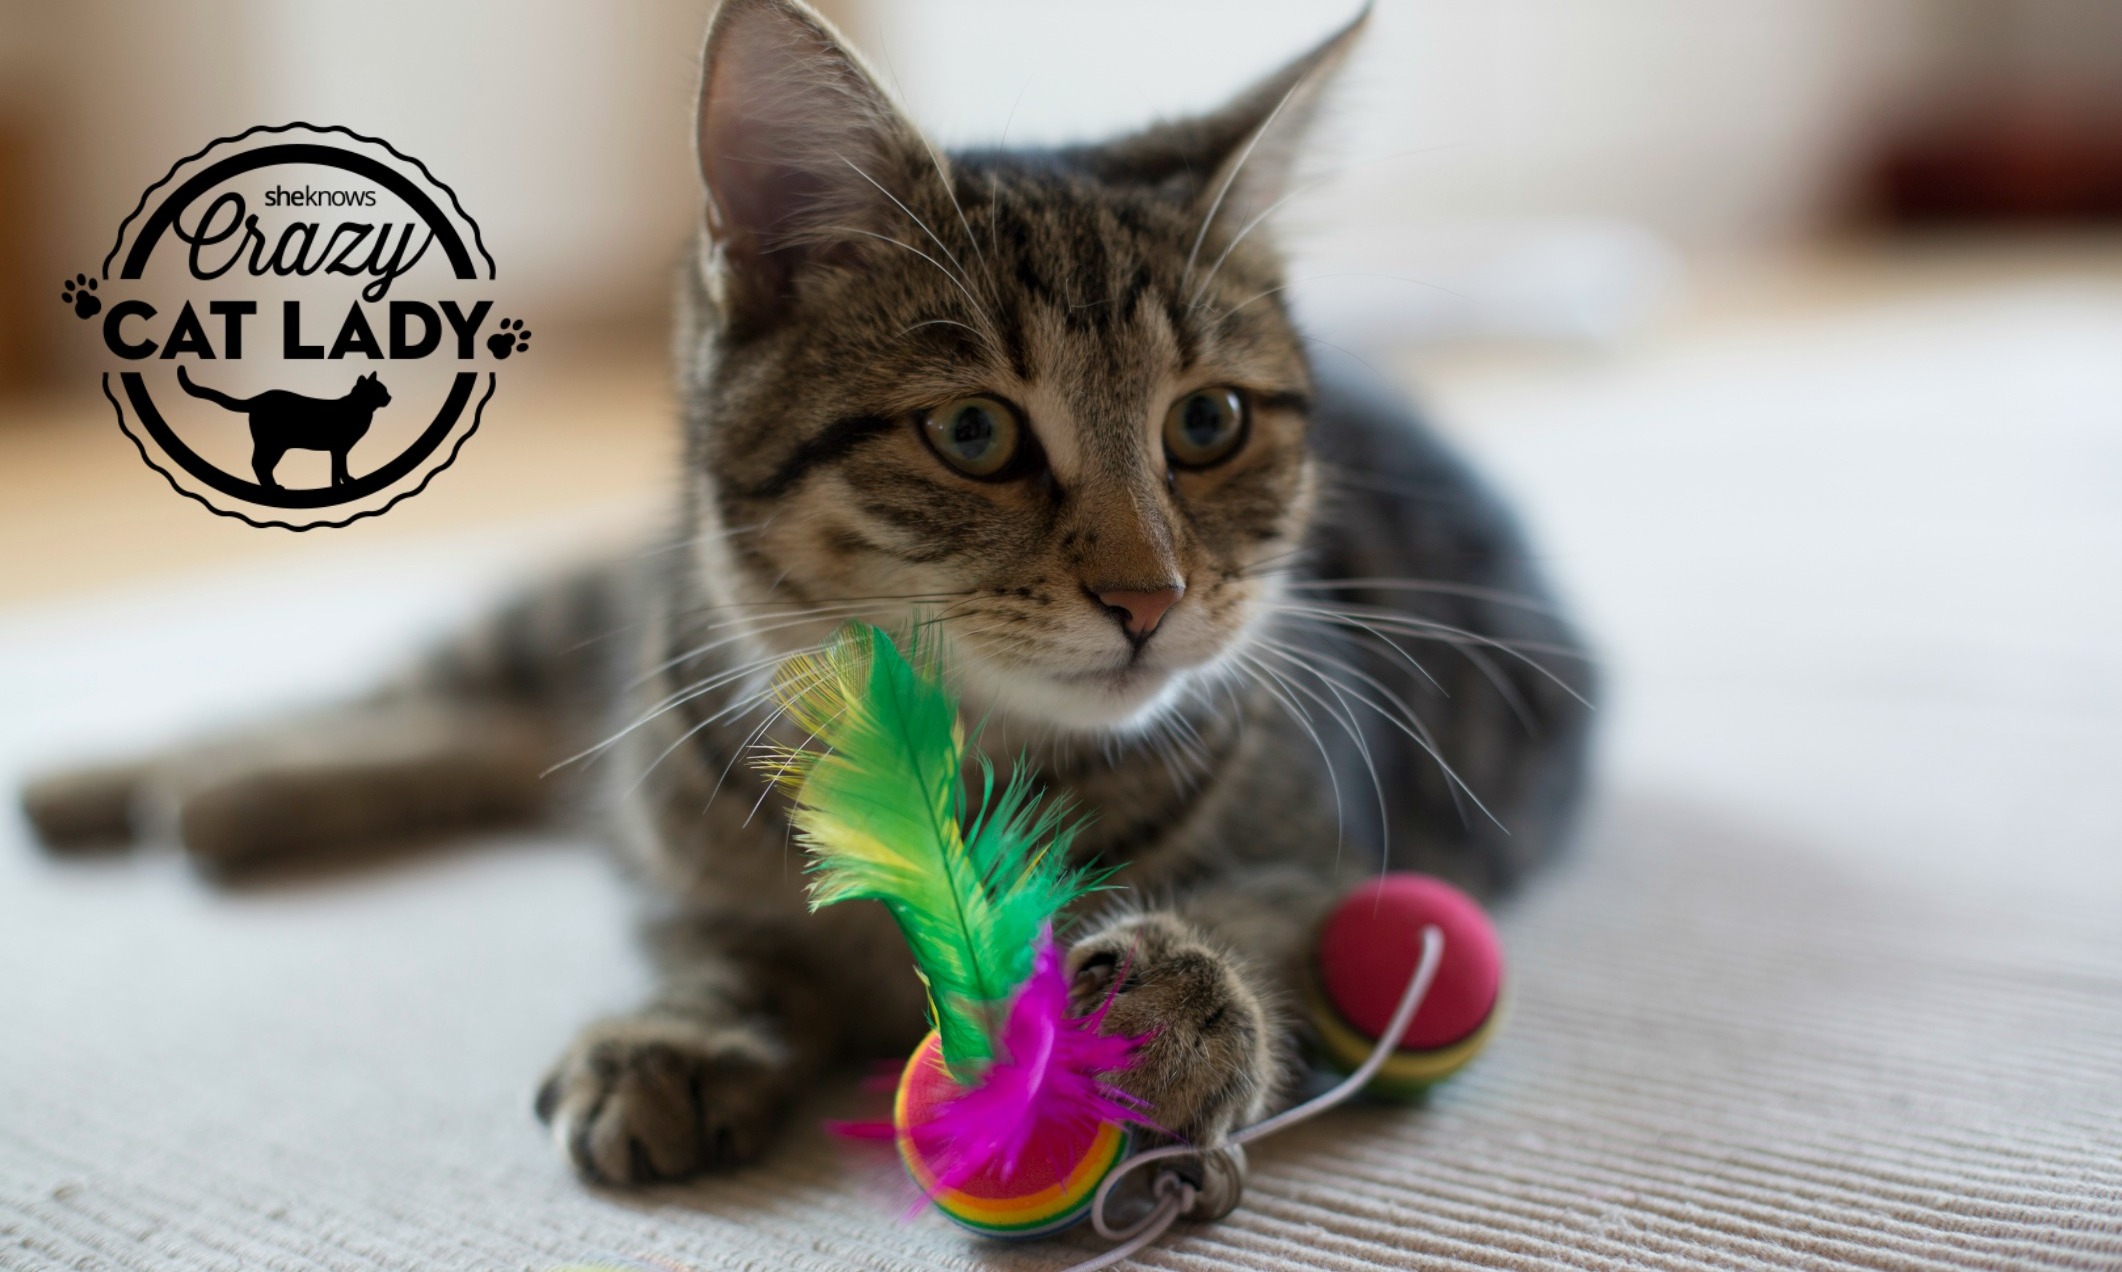 My cats are bored with their toys — how do I keep them entertained?